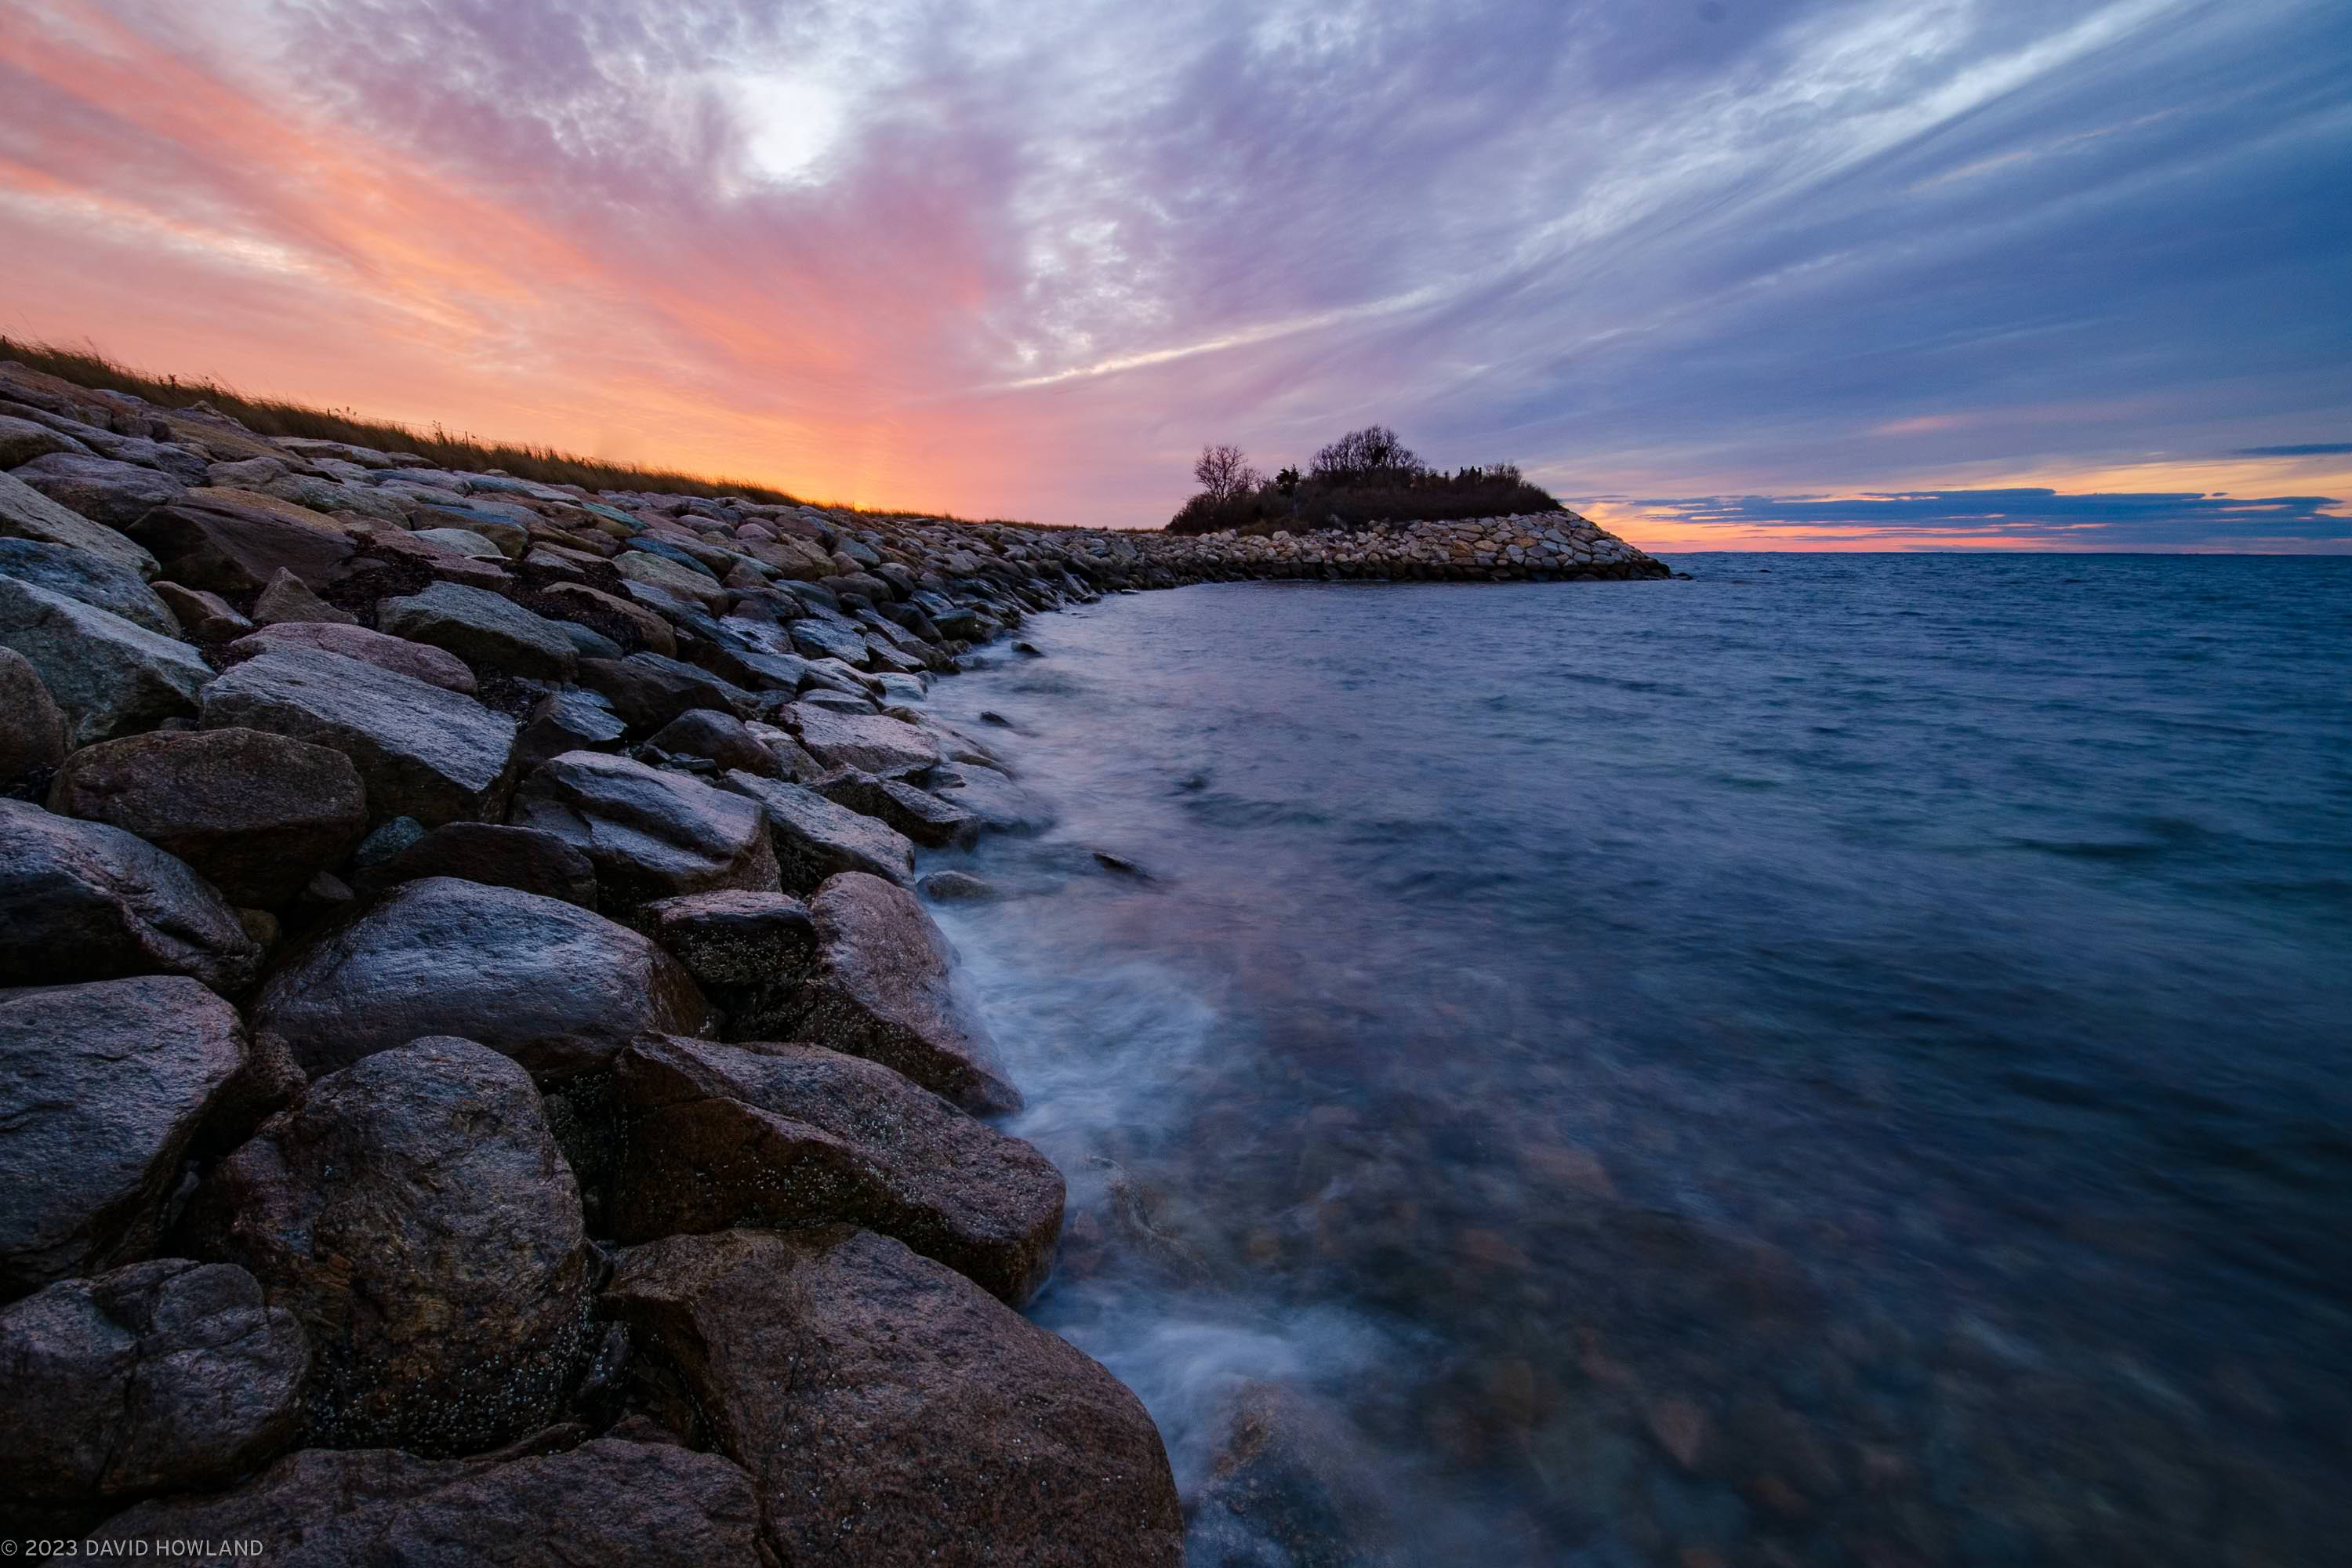 A photo of a colorful sunset behind the rocky outcropping of the Knob in Woods Hole, Massachusetts on Cape Cod.